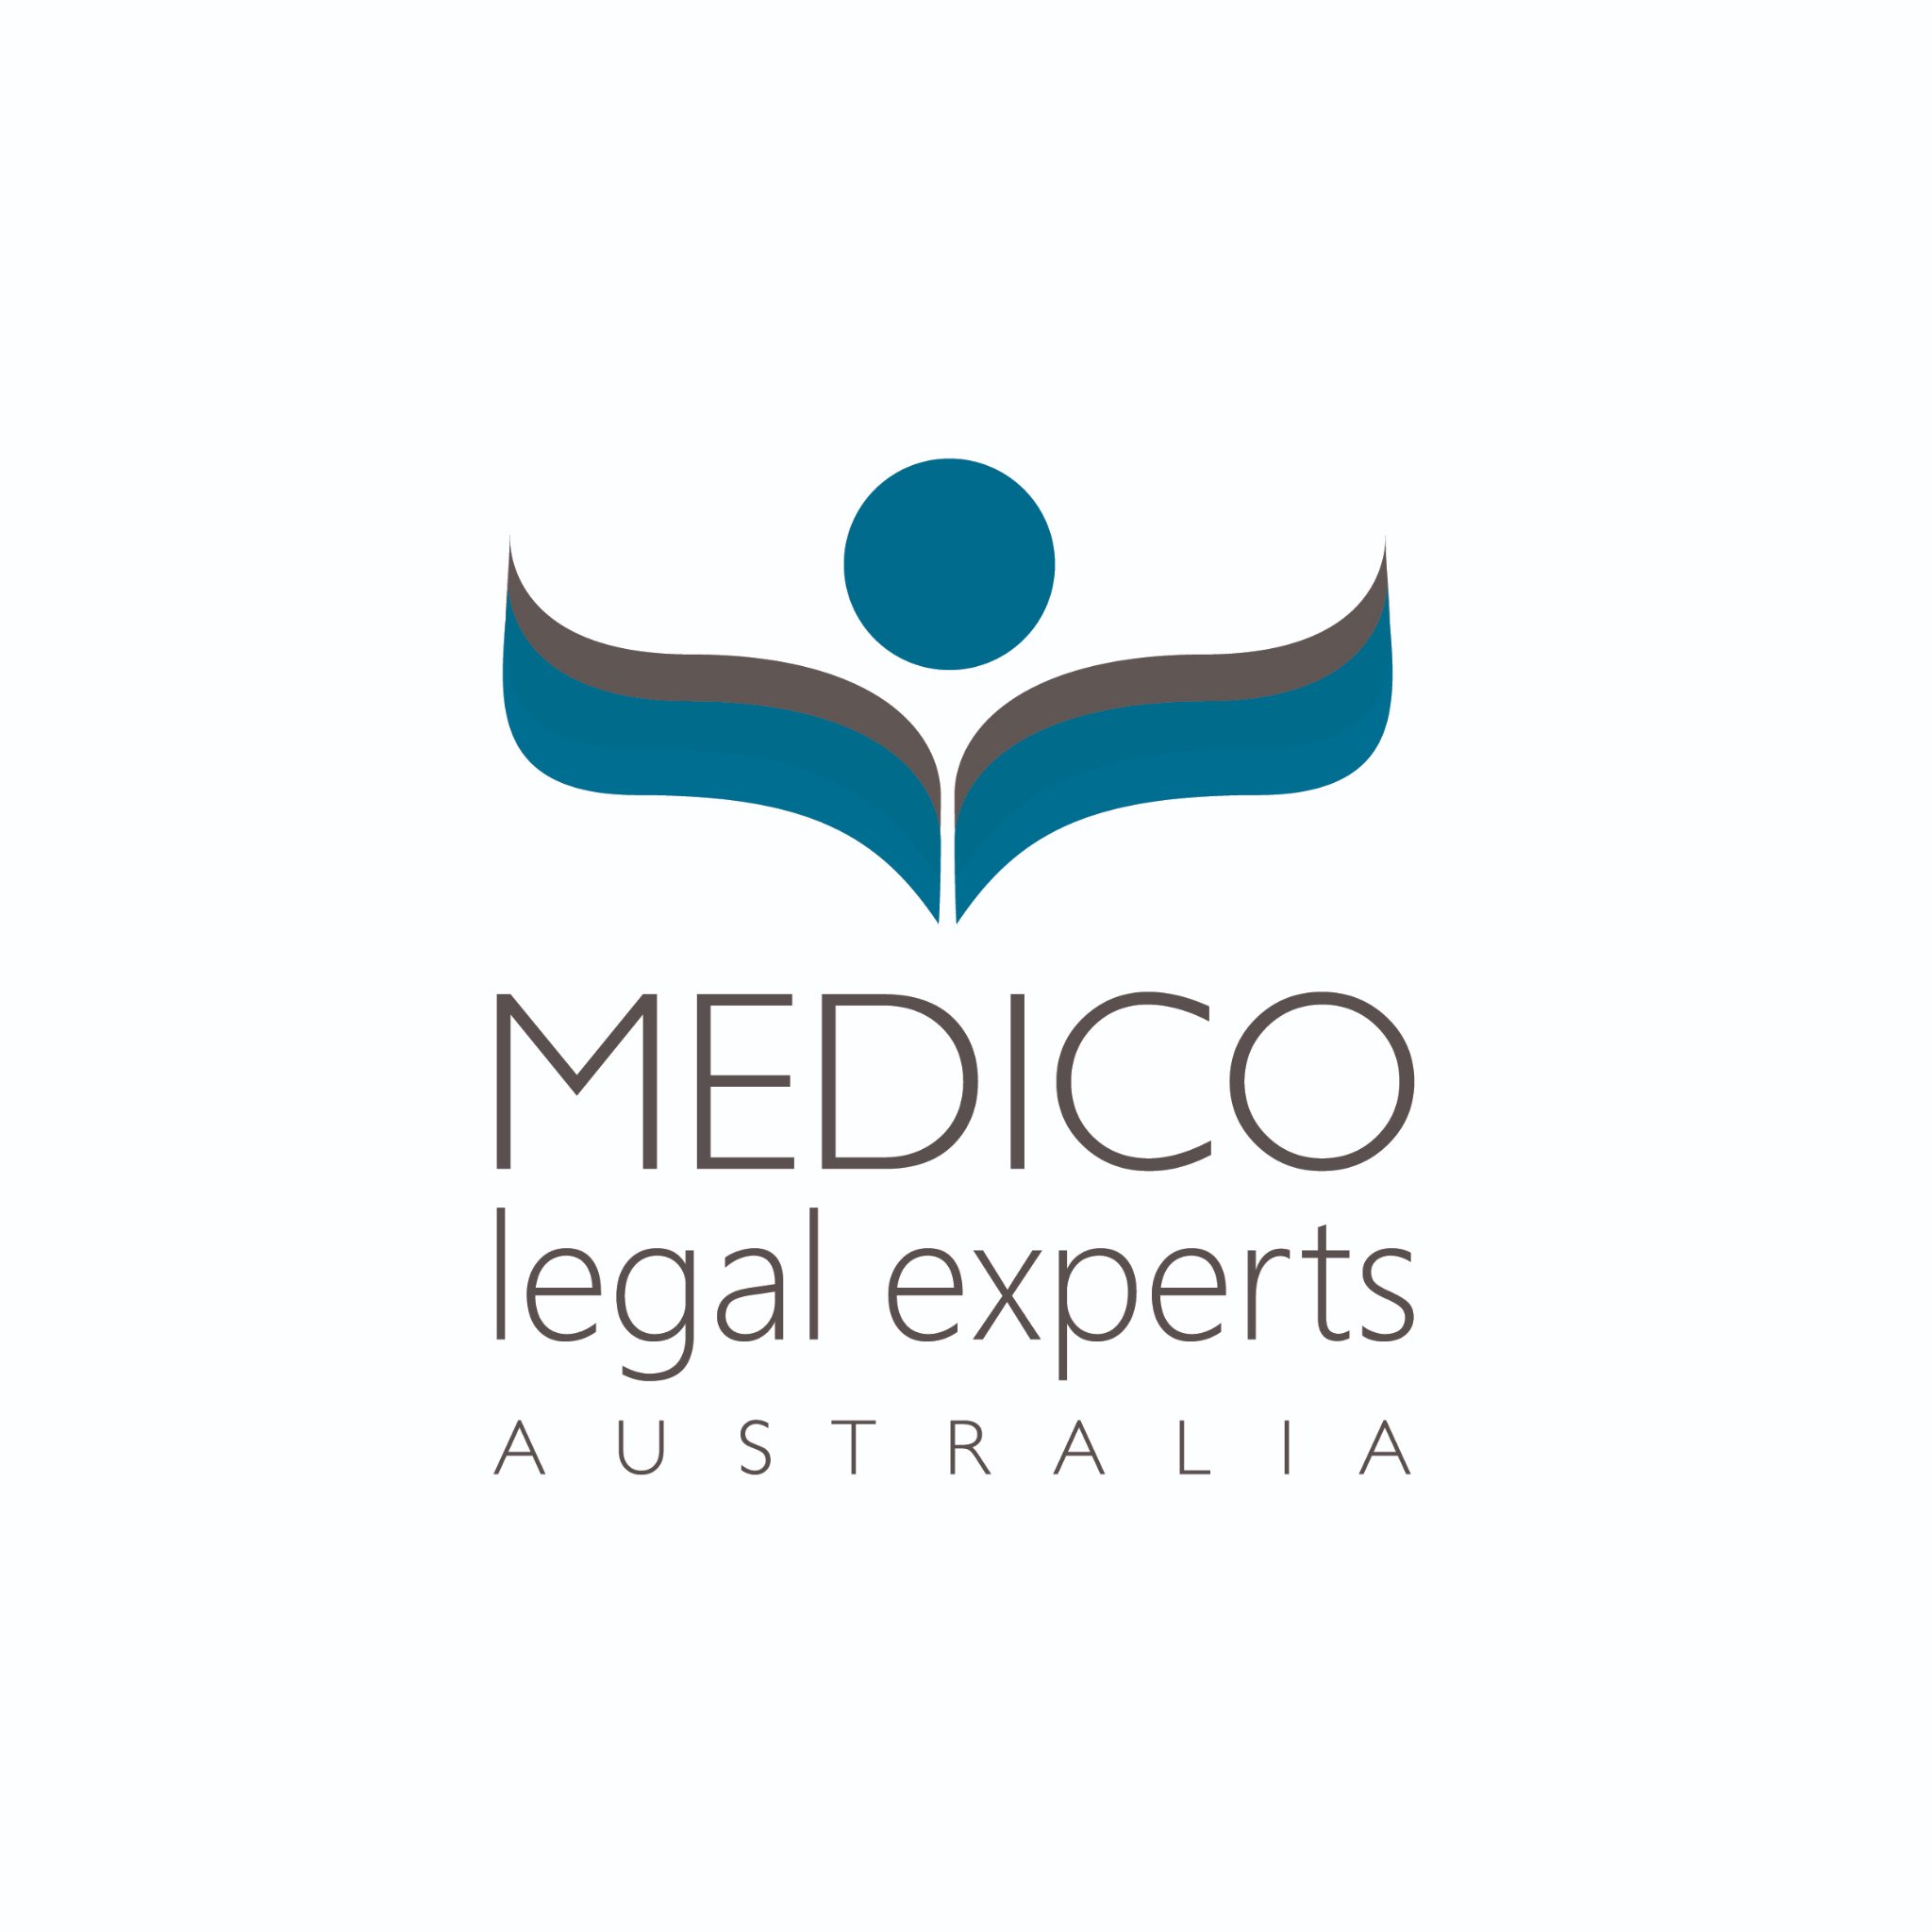 We provide expert clinical opinions throughout Australia.